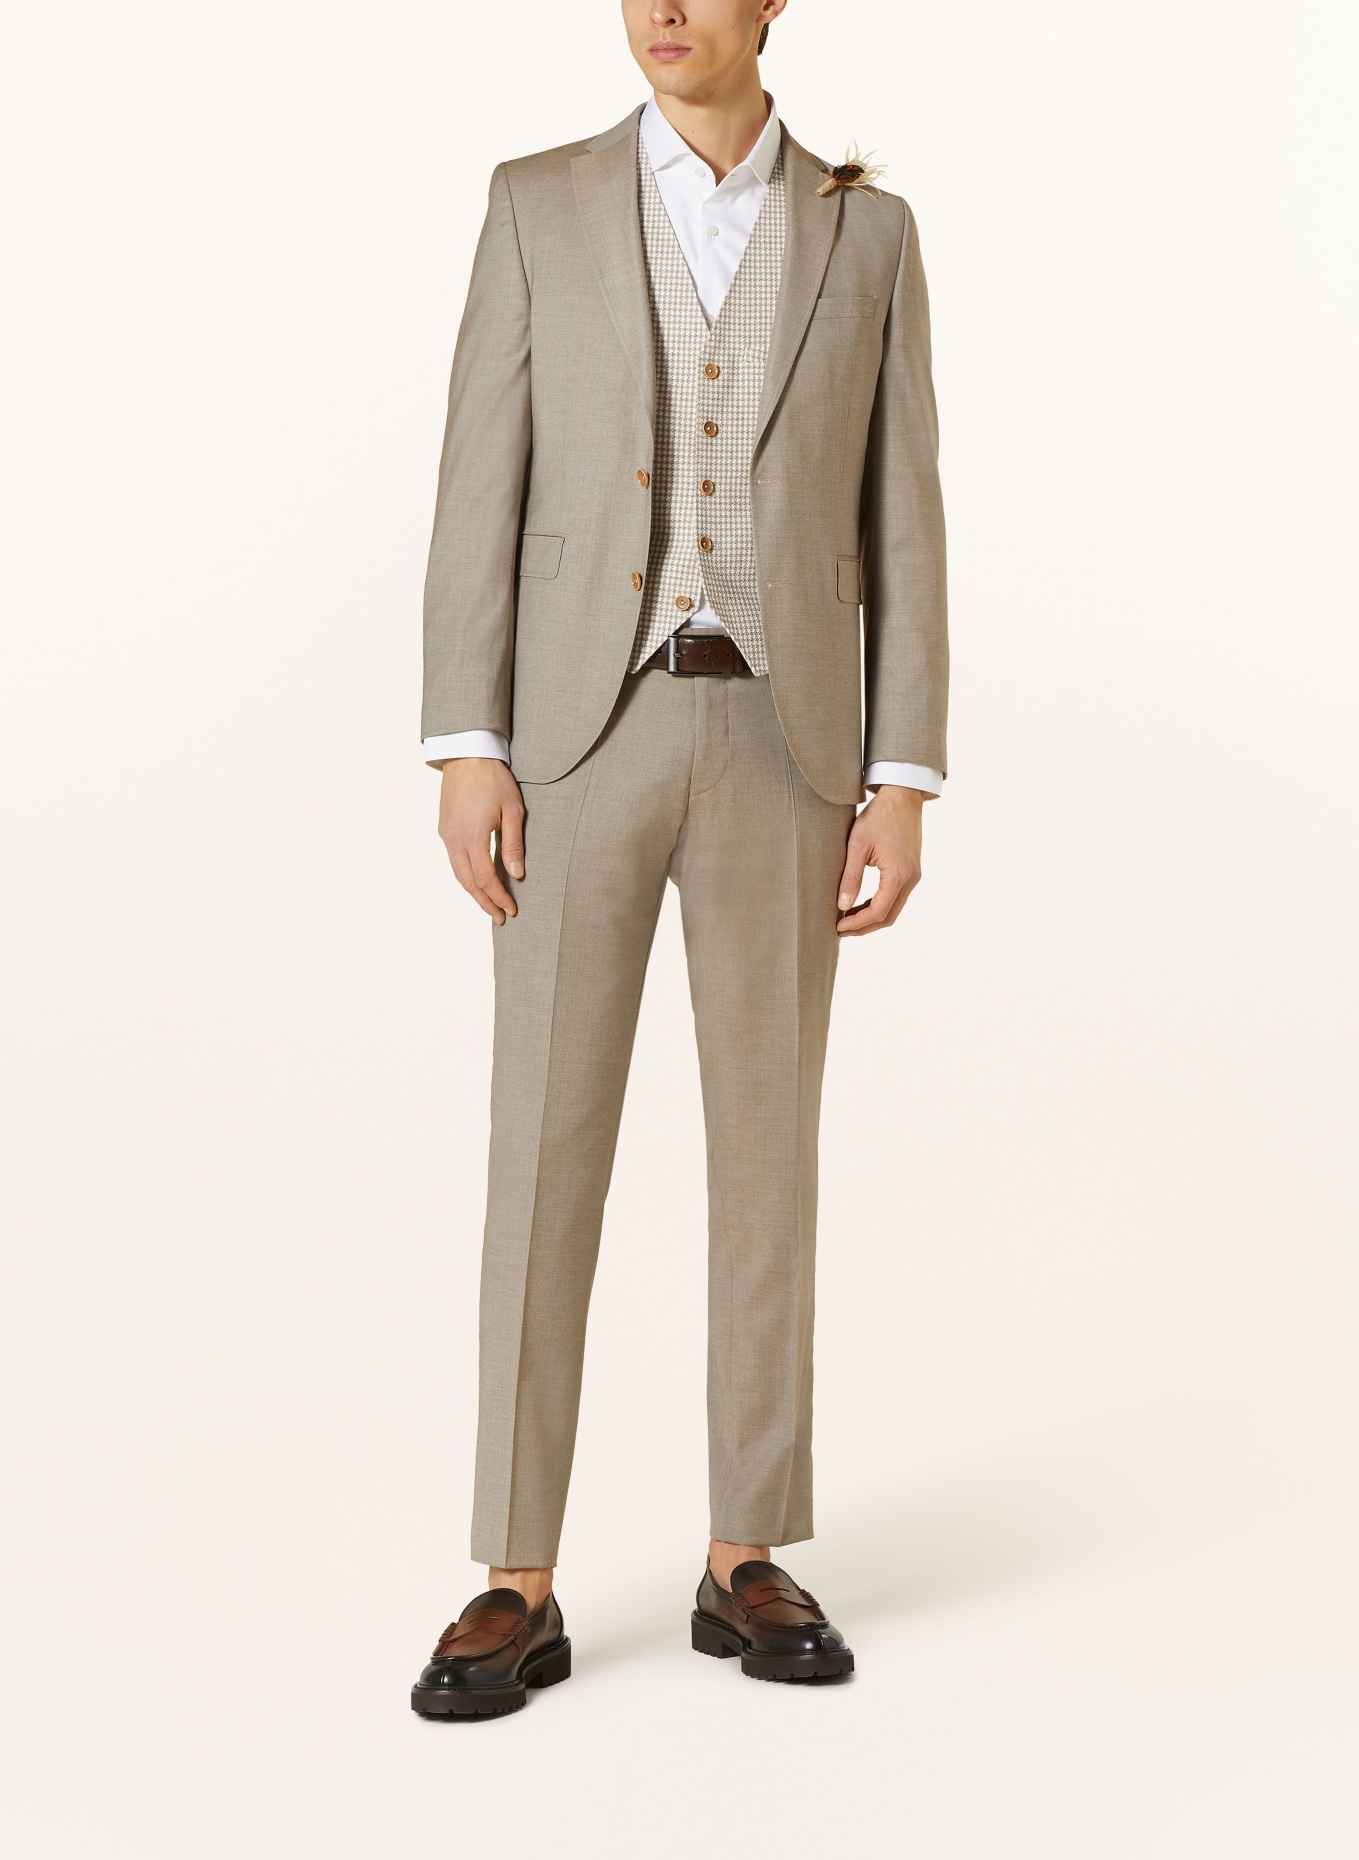 Suit trousers with wool blend Color beige - RESERVED - 4044W-08X